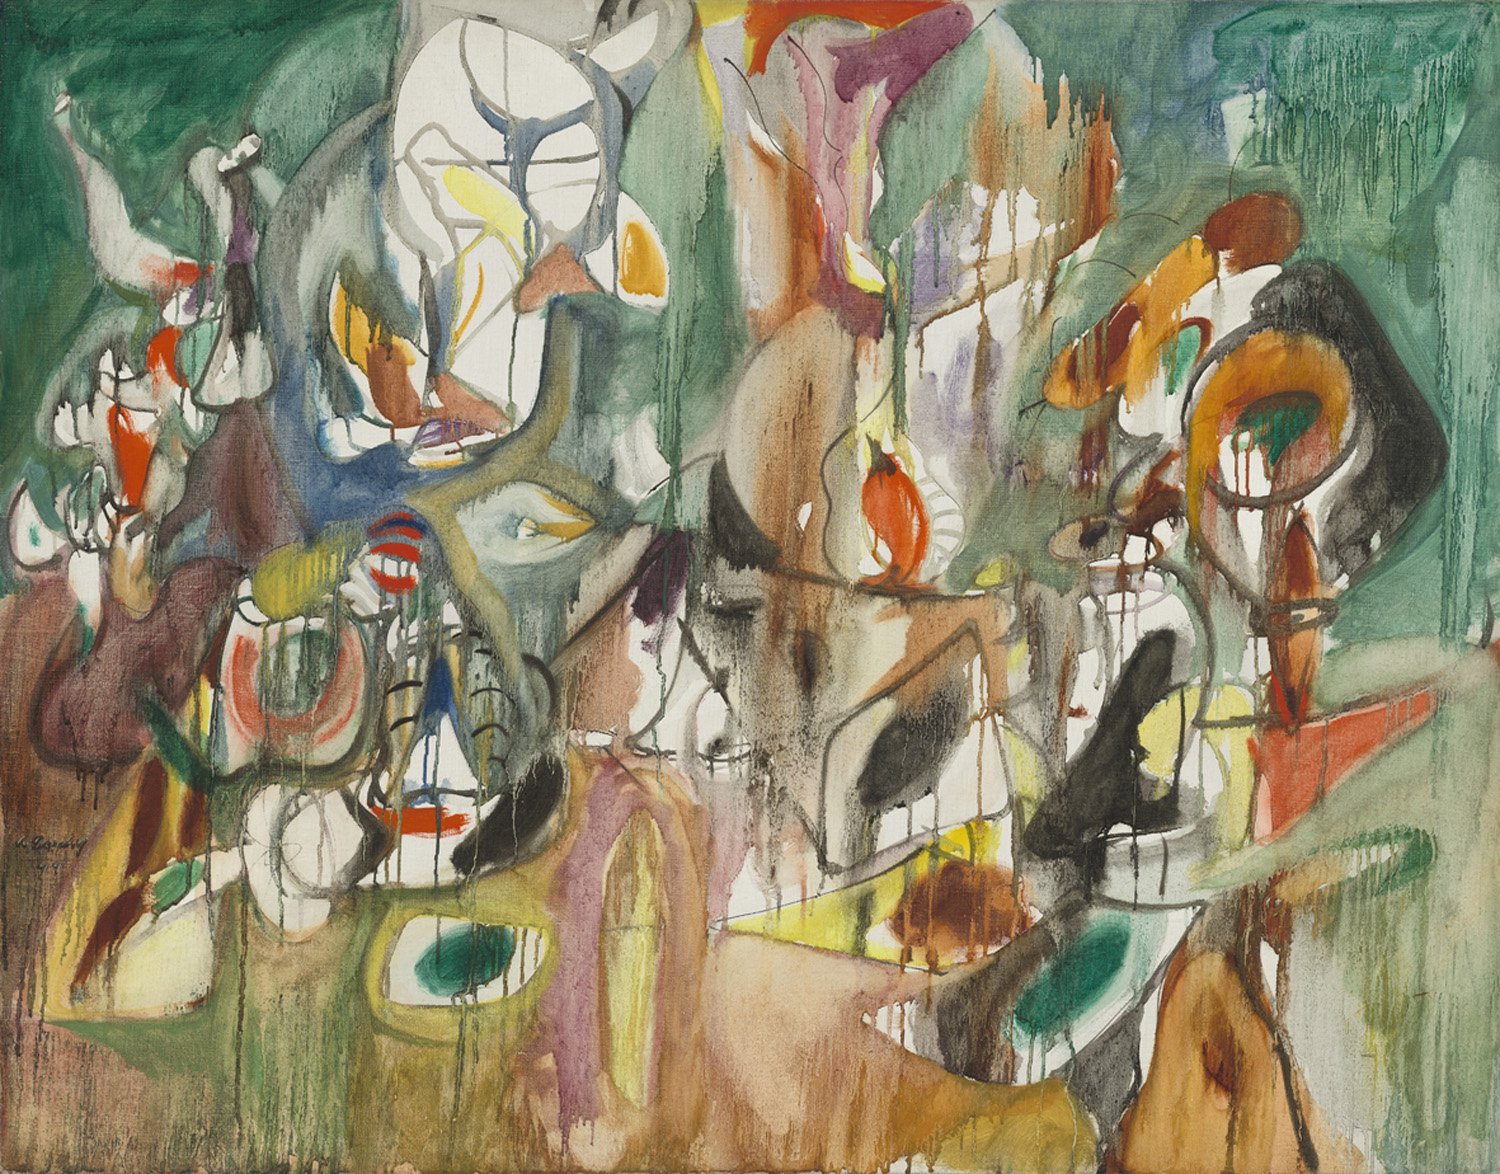 One Year the Milkweed, 1944, oil on canvas, National Gallery of Art, Washington, D.C. Ailsa Mellon Bruce Fund © 2018 The Estate of Arshile Gorky Artists Rights Society (ARS), Ne 1